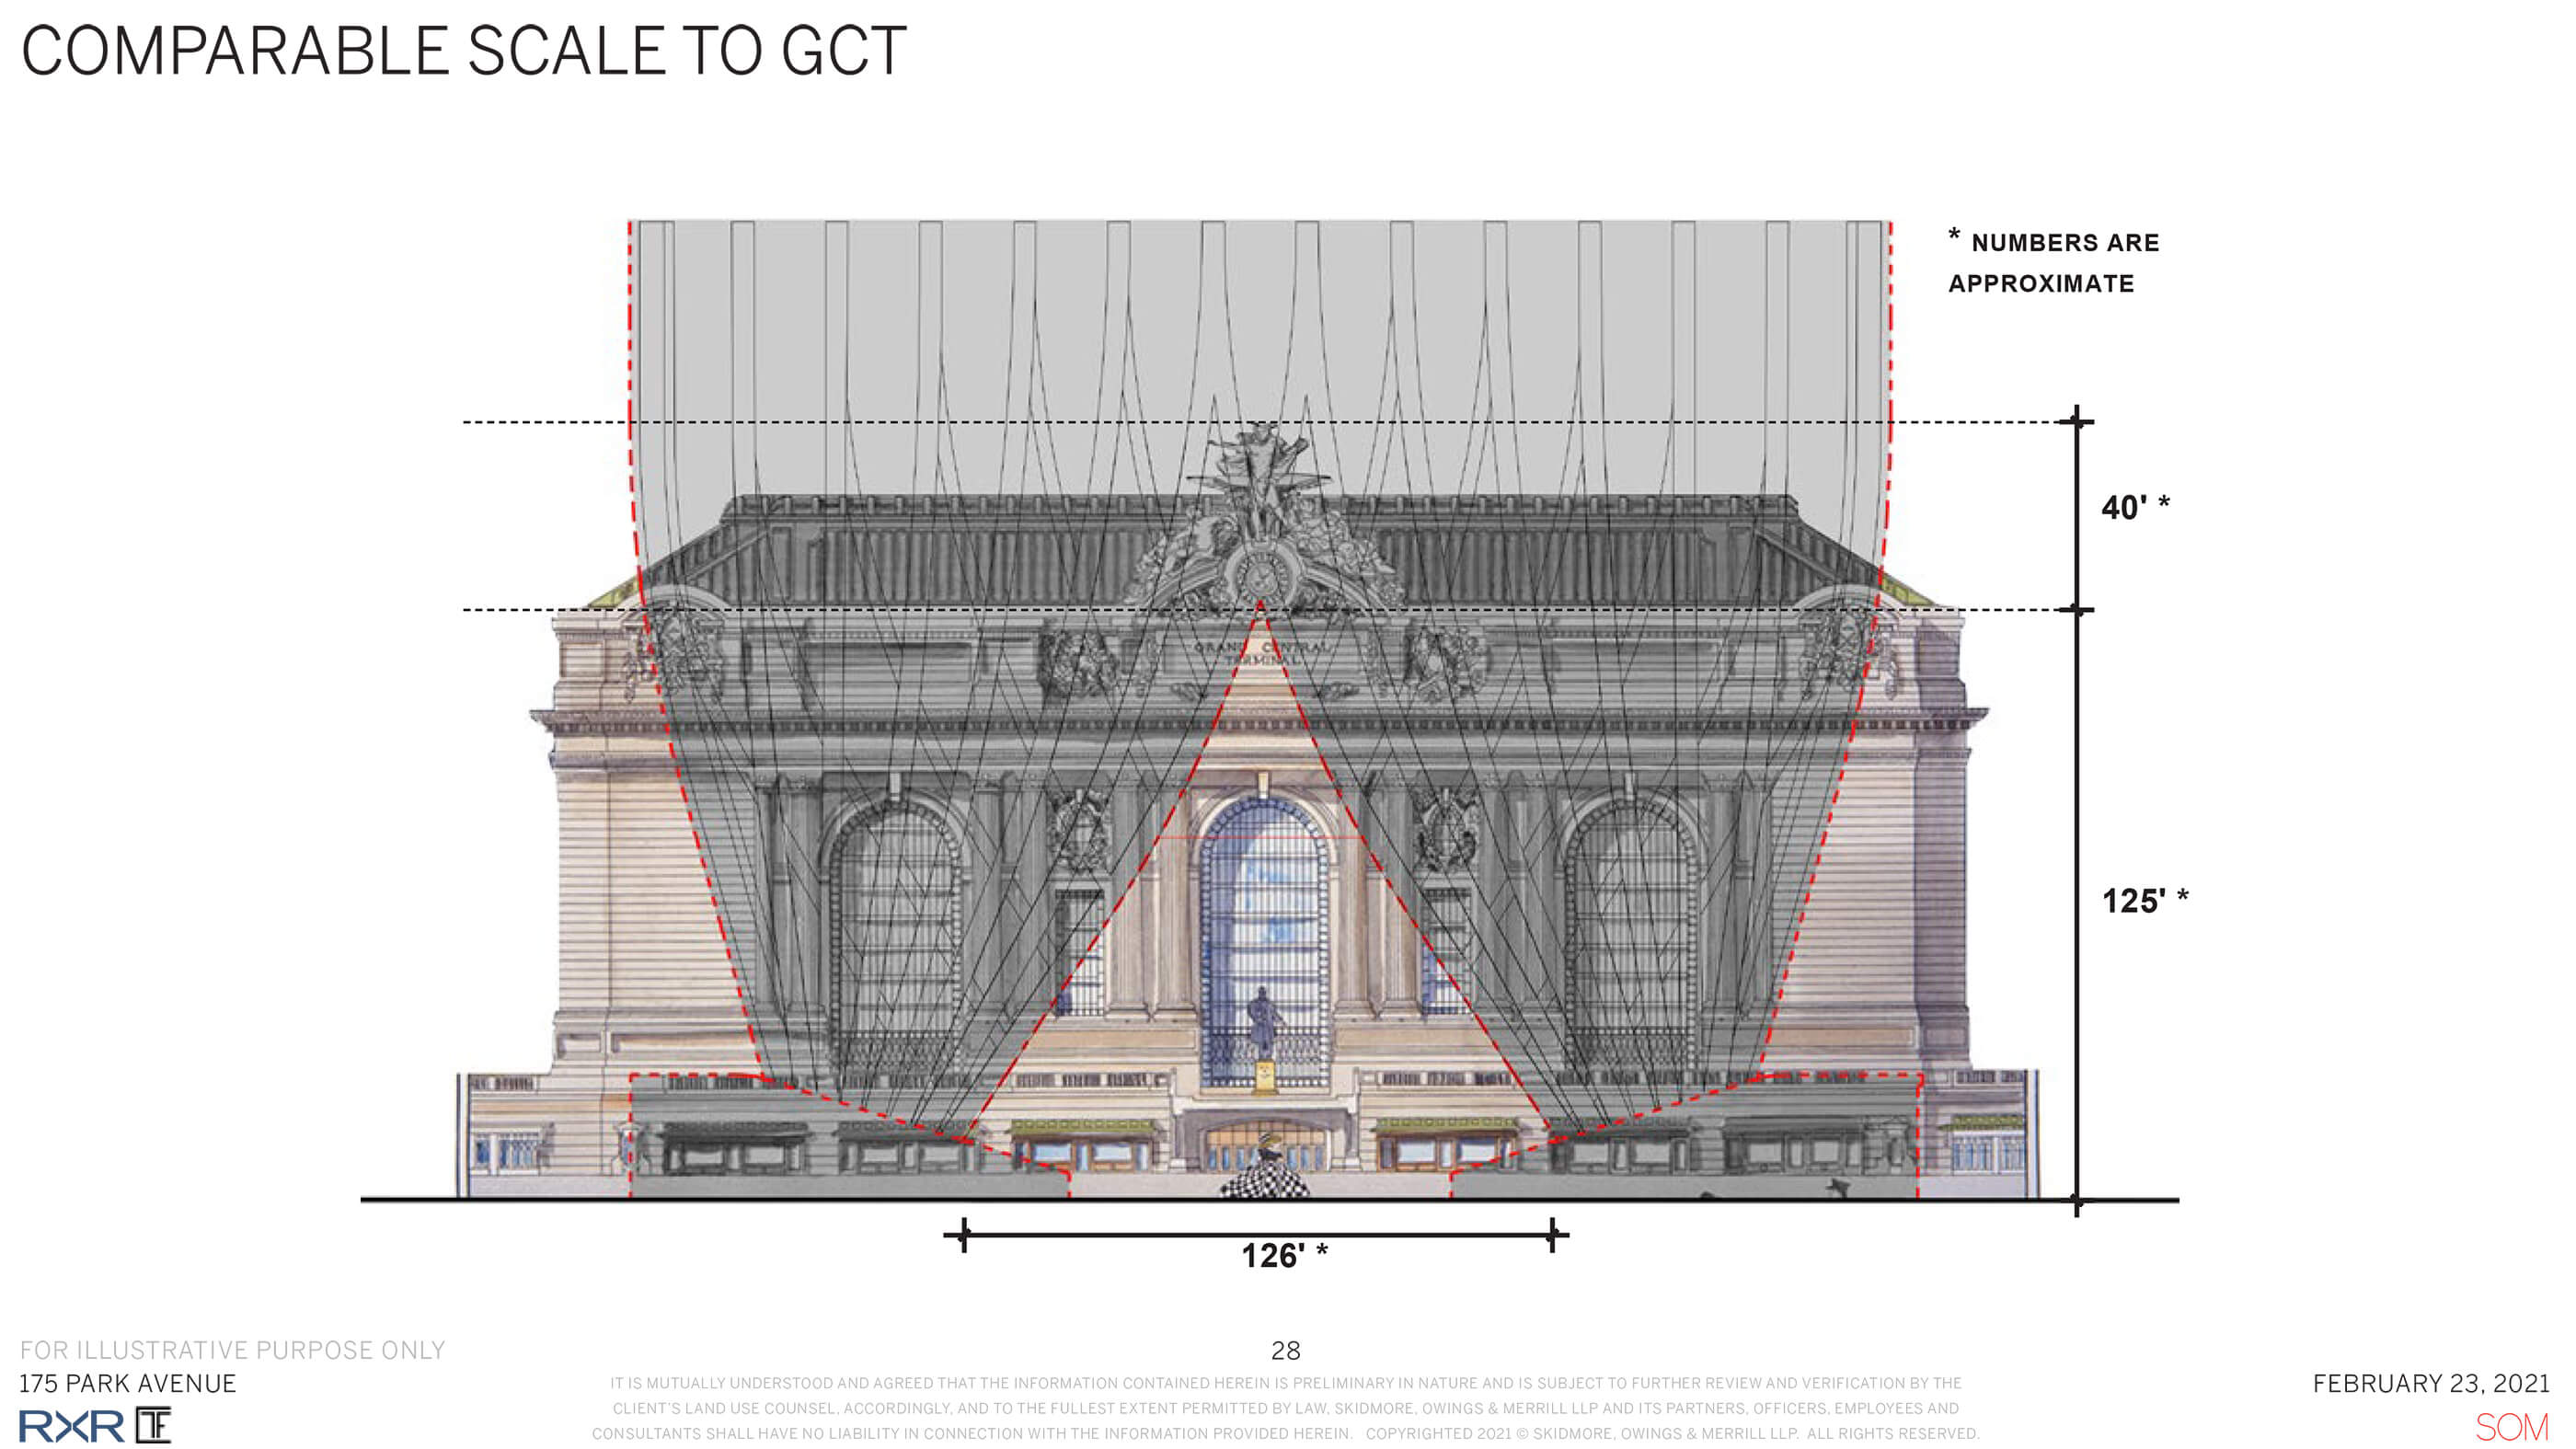 diagram of a tower with "pulled back drape" facade overlain with grand central rail terminal